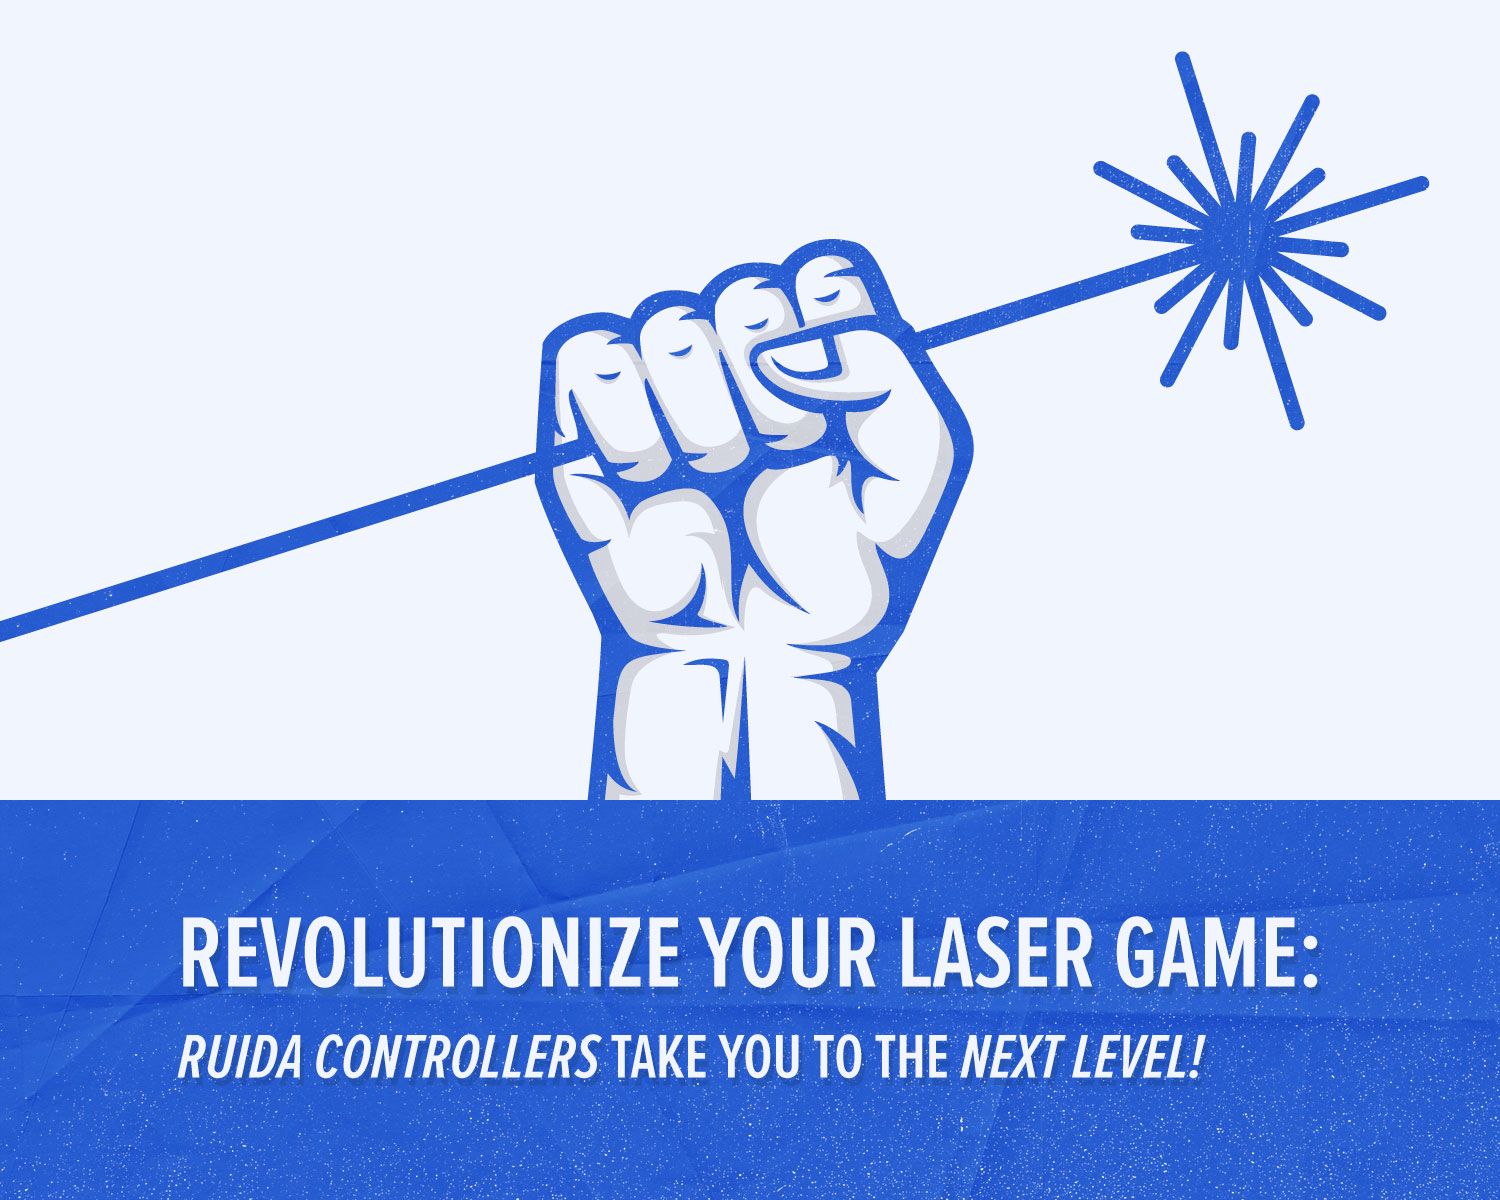 An illustrated hand grasping a laser beam with title text